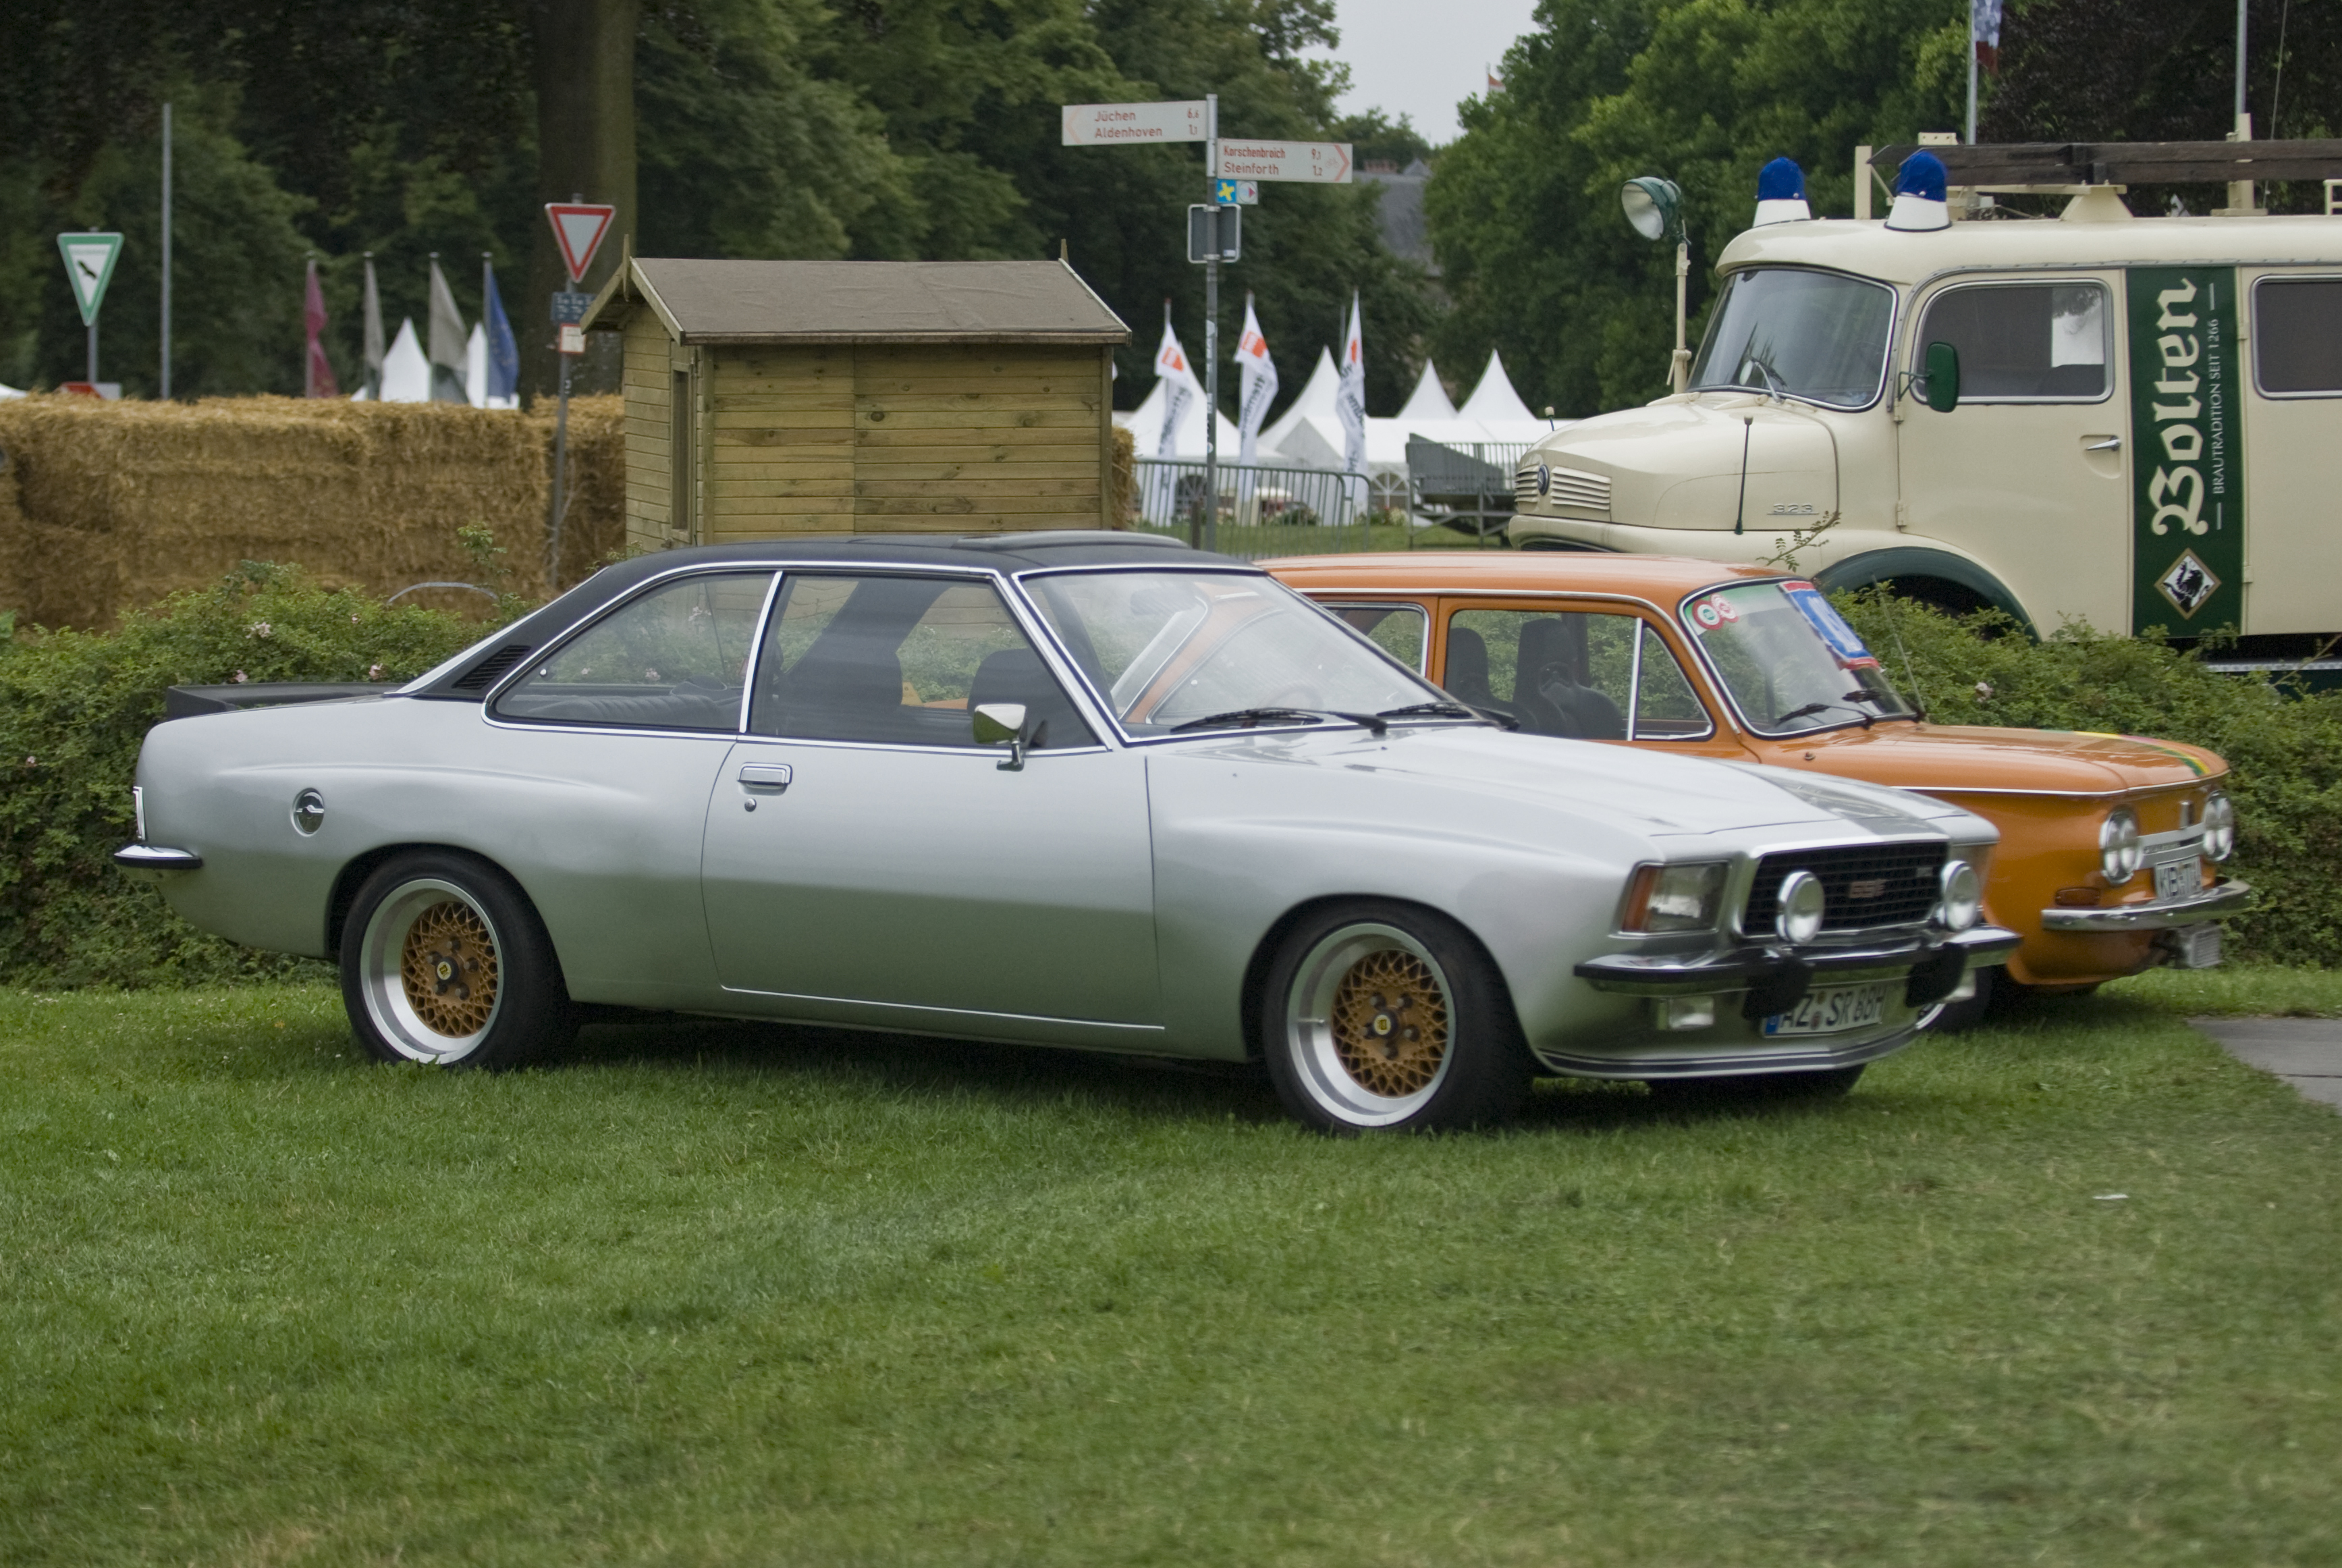 Mad 4 Wheels - 1972 Opel Commodore coupÃ© - Best quality free high ...